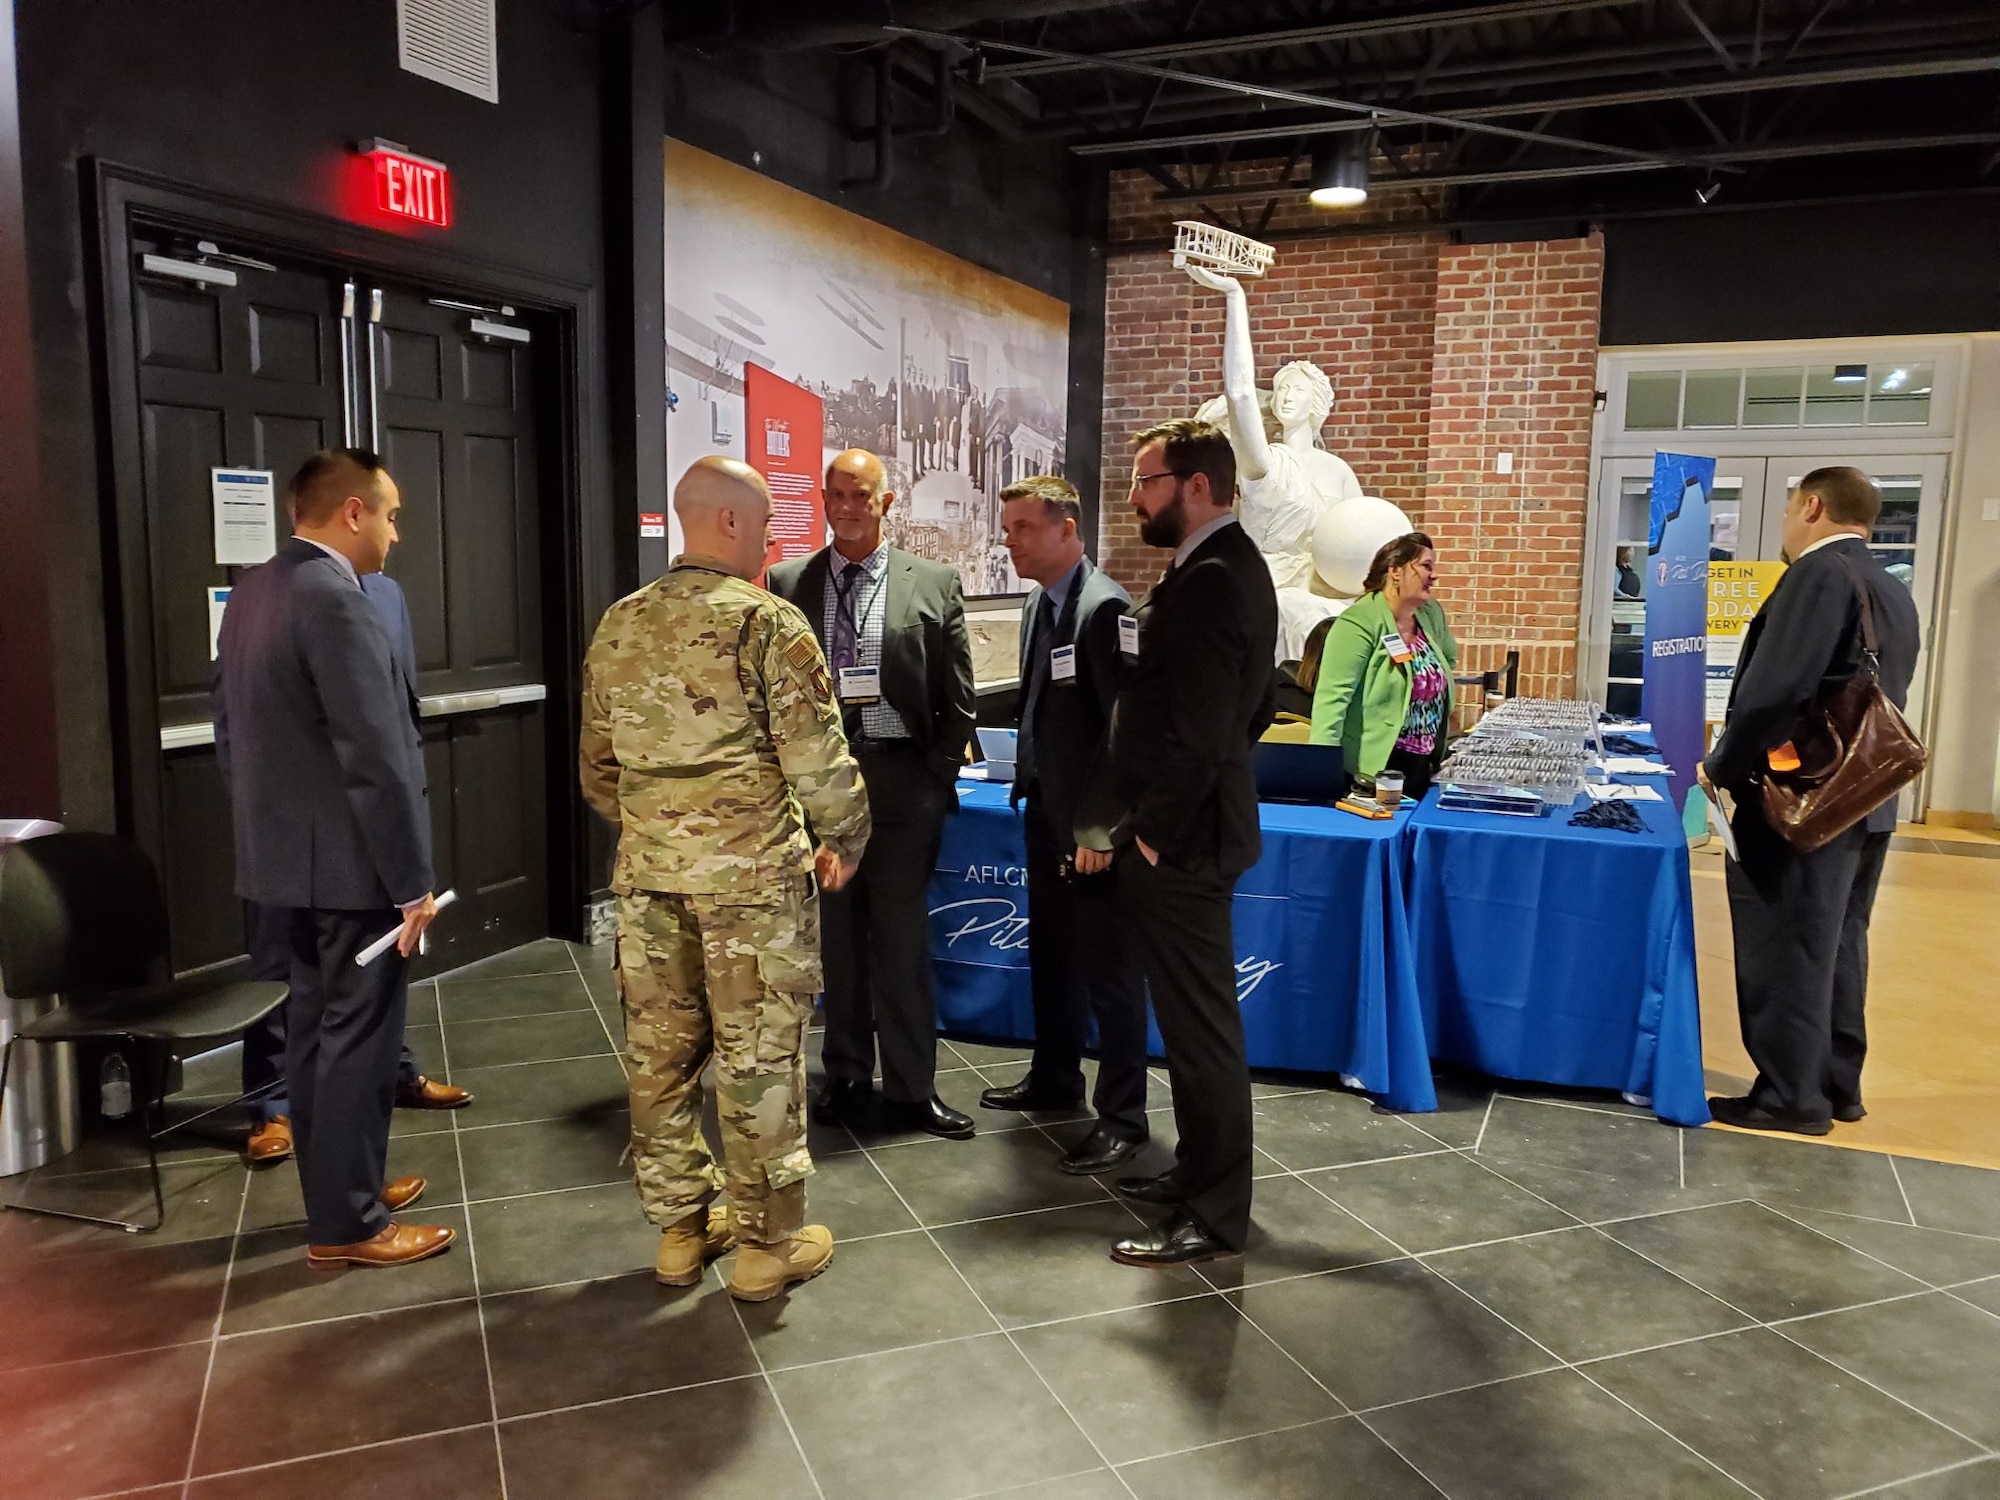 23 small businesses participated in a Pitch Day event  November 15, 2019, in Dayton, Ohio, hosted by the Air Force Life Cycle Management Center. Approximately $15 million in U.S. Air Force contracts were awarded. (Courtesy photo)